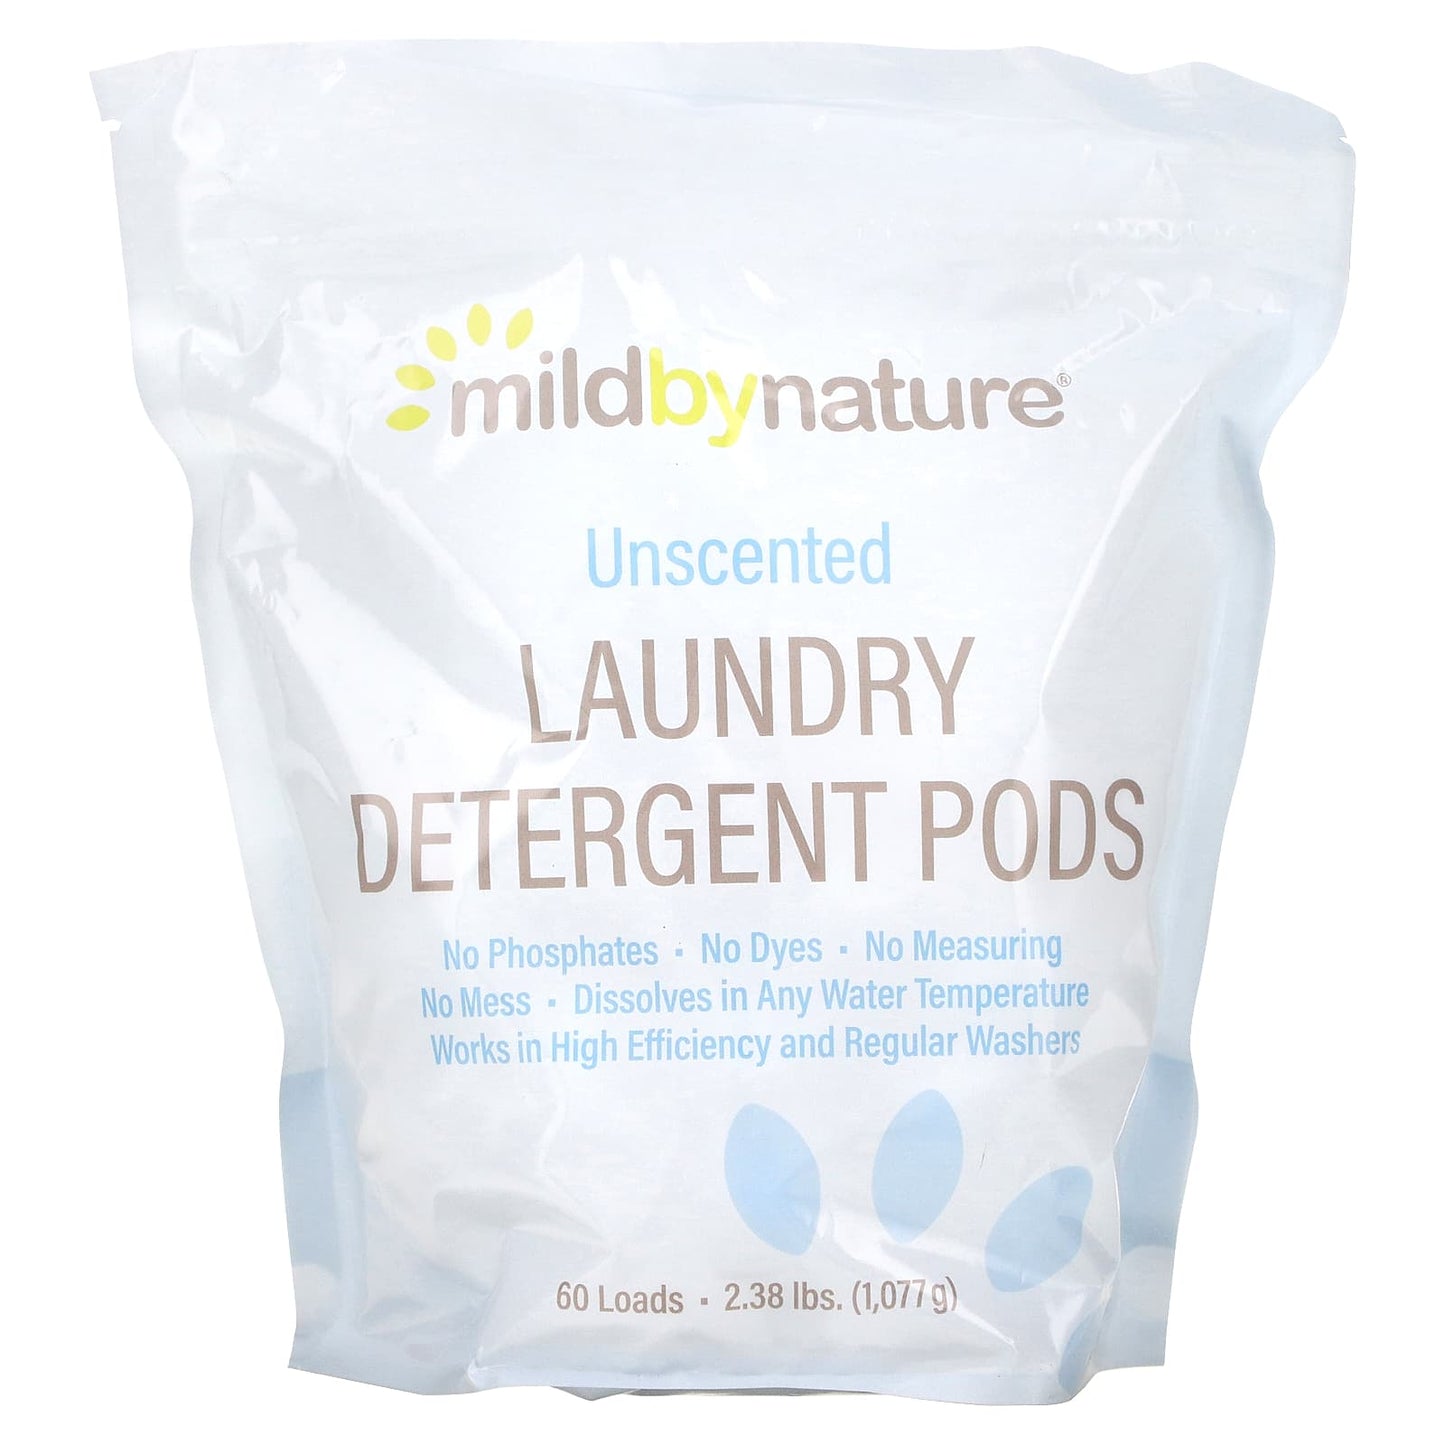 Mild By Nature-Laundry Detergent Pods-Unscented-60 Loads-2.38 lbs (1,077 g)